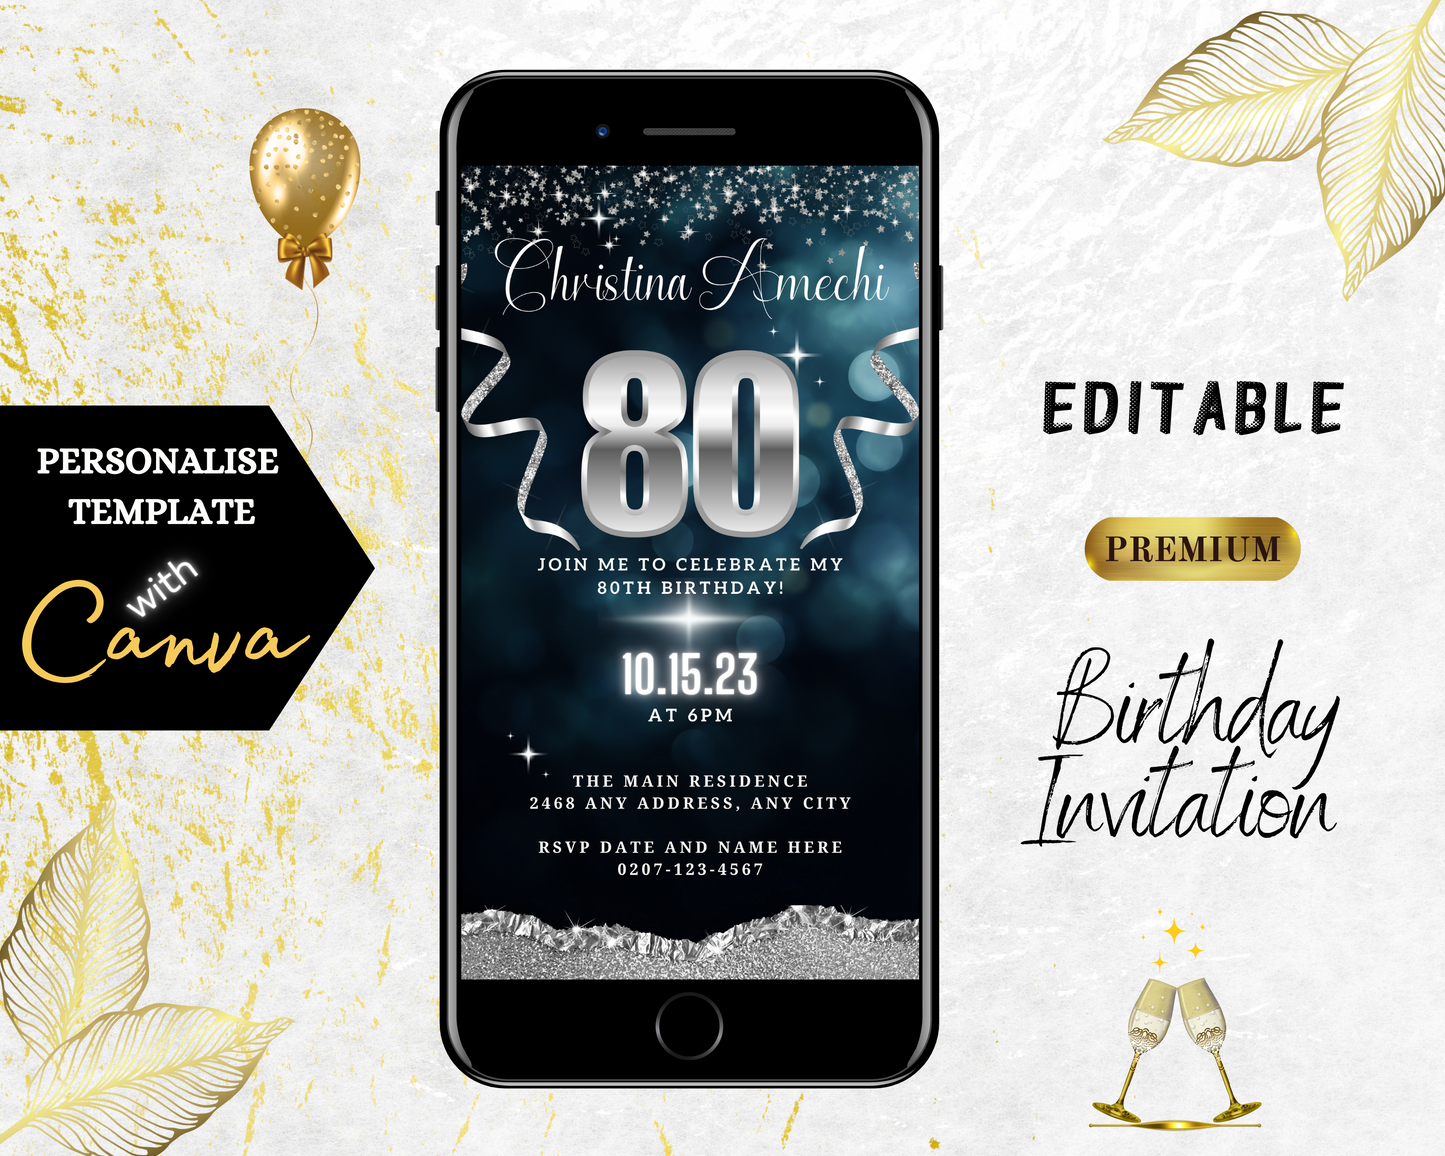 Smartphone displaying a customizable Navy Blue Silver Glitter 80th Birthday Evite template, featuring editable text and design elements for a personalized digital invitation.